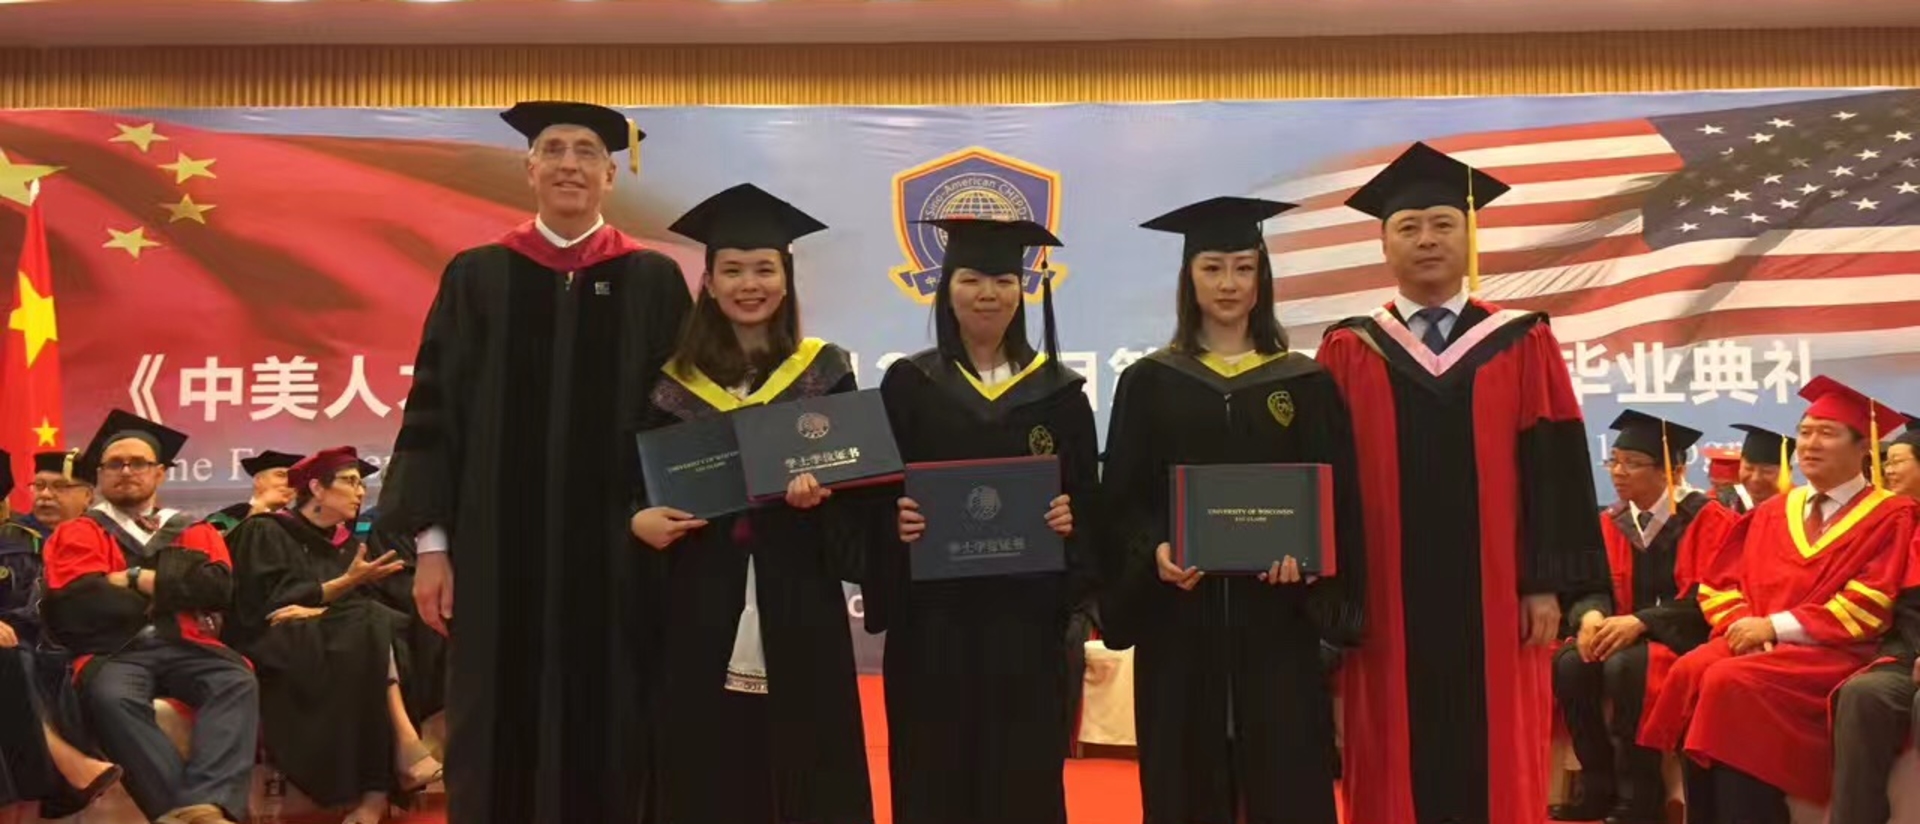 Dr. Michael Carney and graduates of the China 1-2-1 program. 